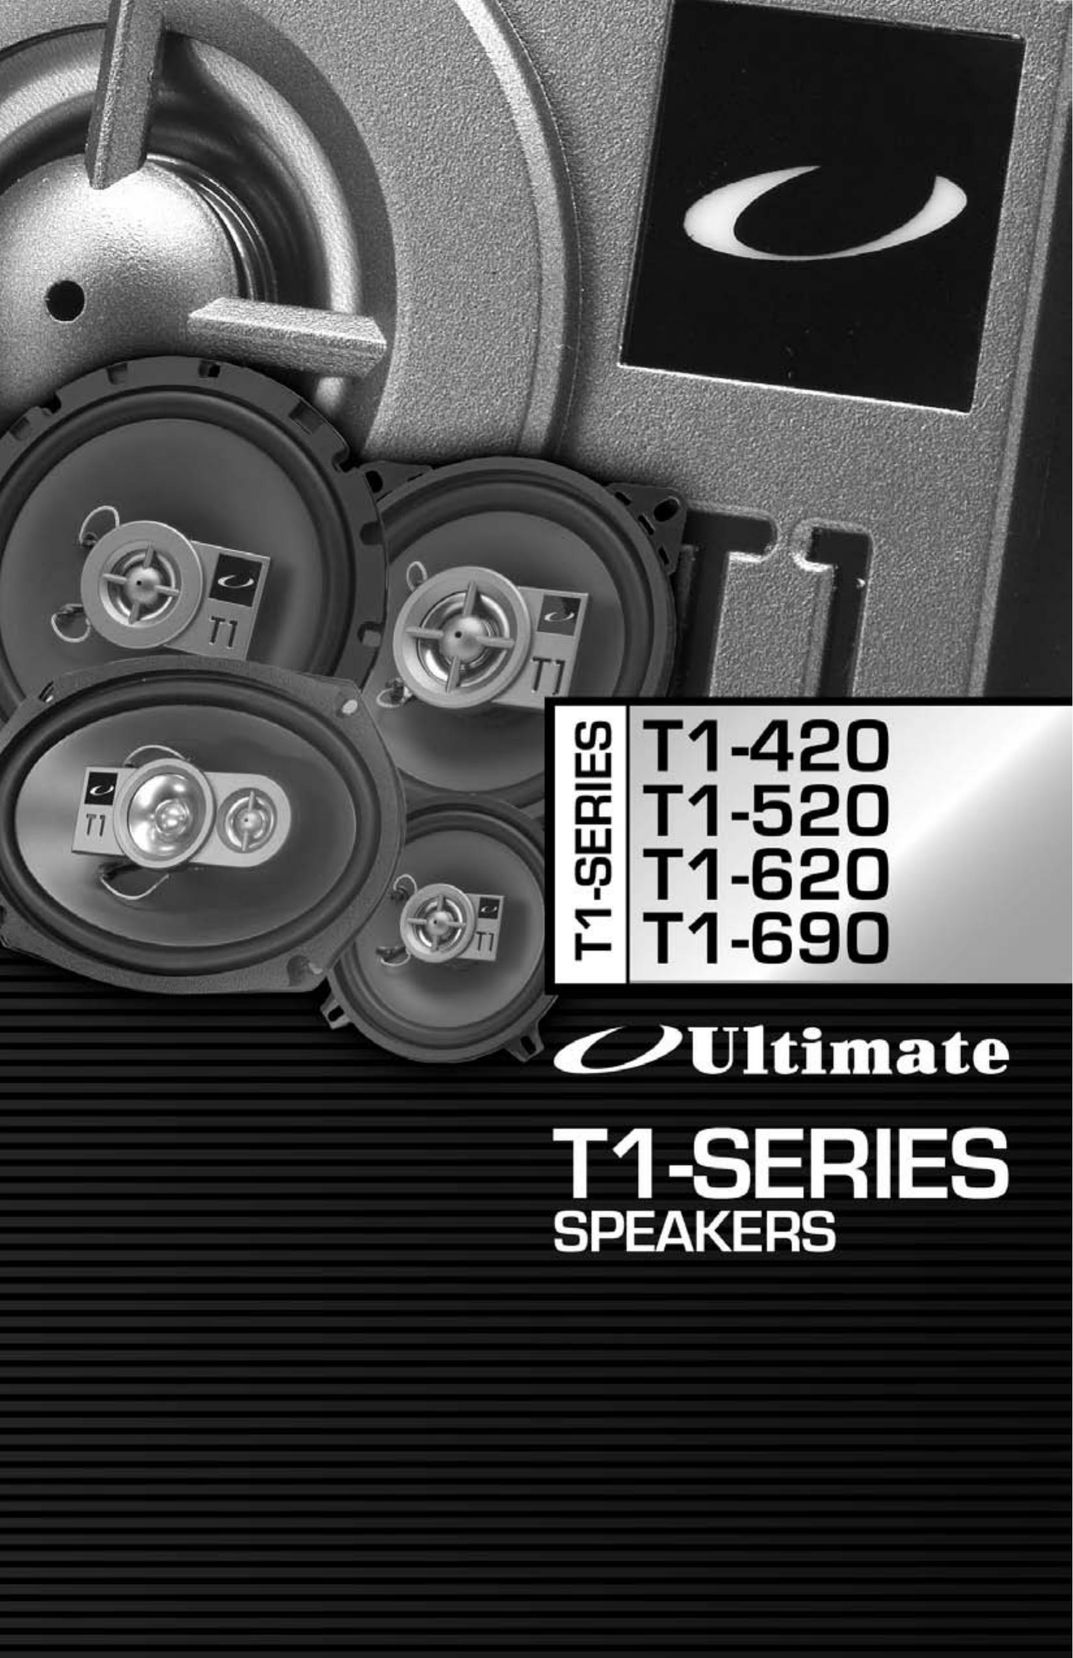 Ultimate Products T1-420 Car Speaker User Manual